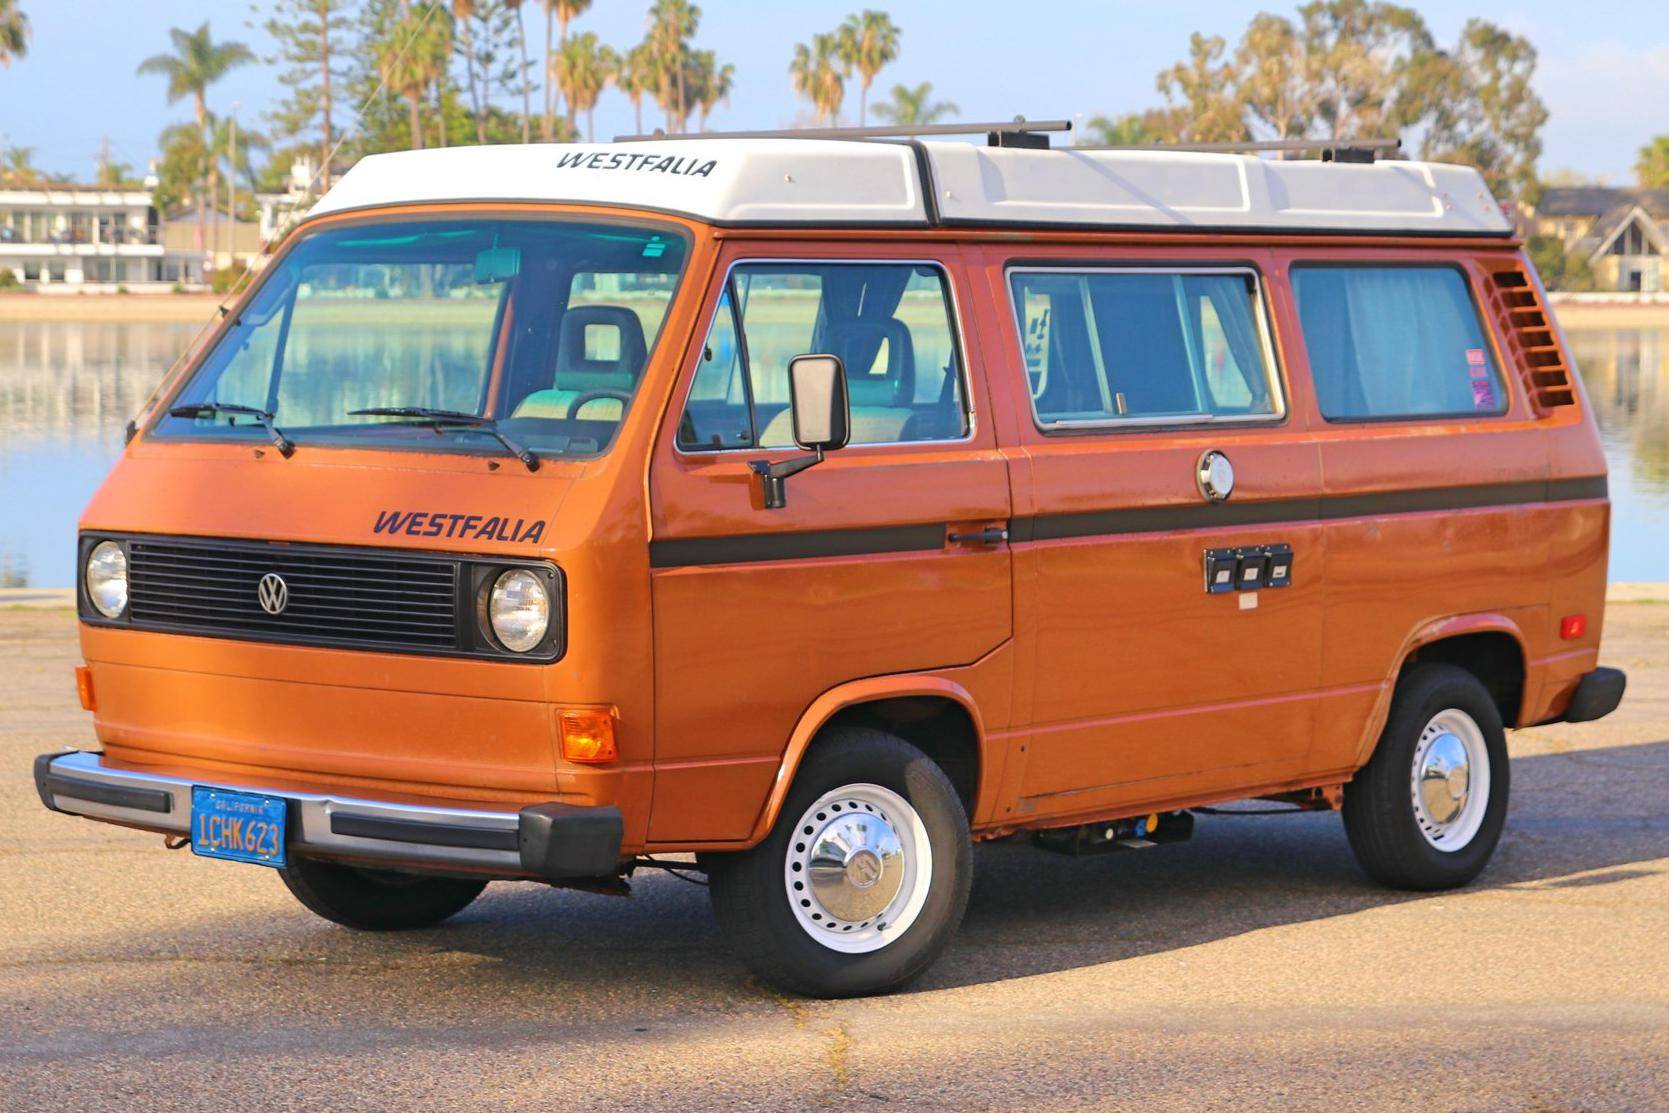 Pick of the Day is camping-trip-ready '81 VW Westfalia